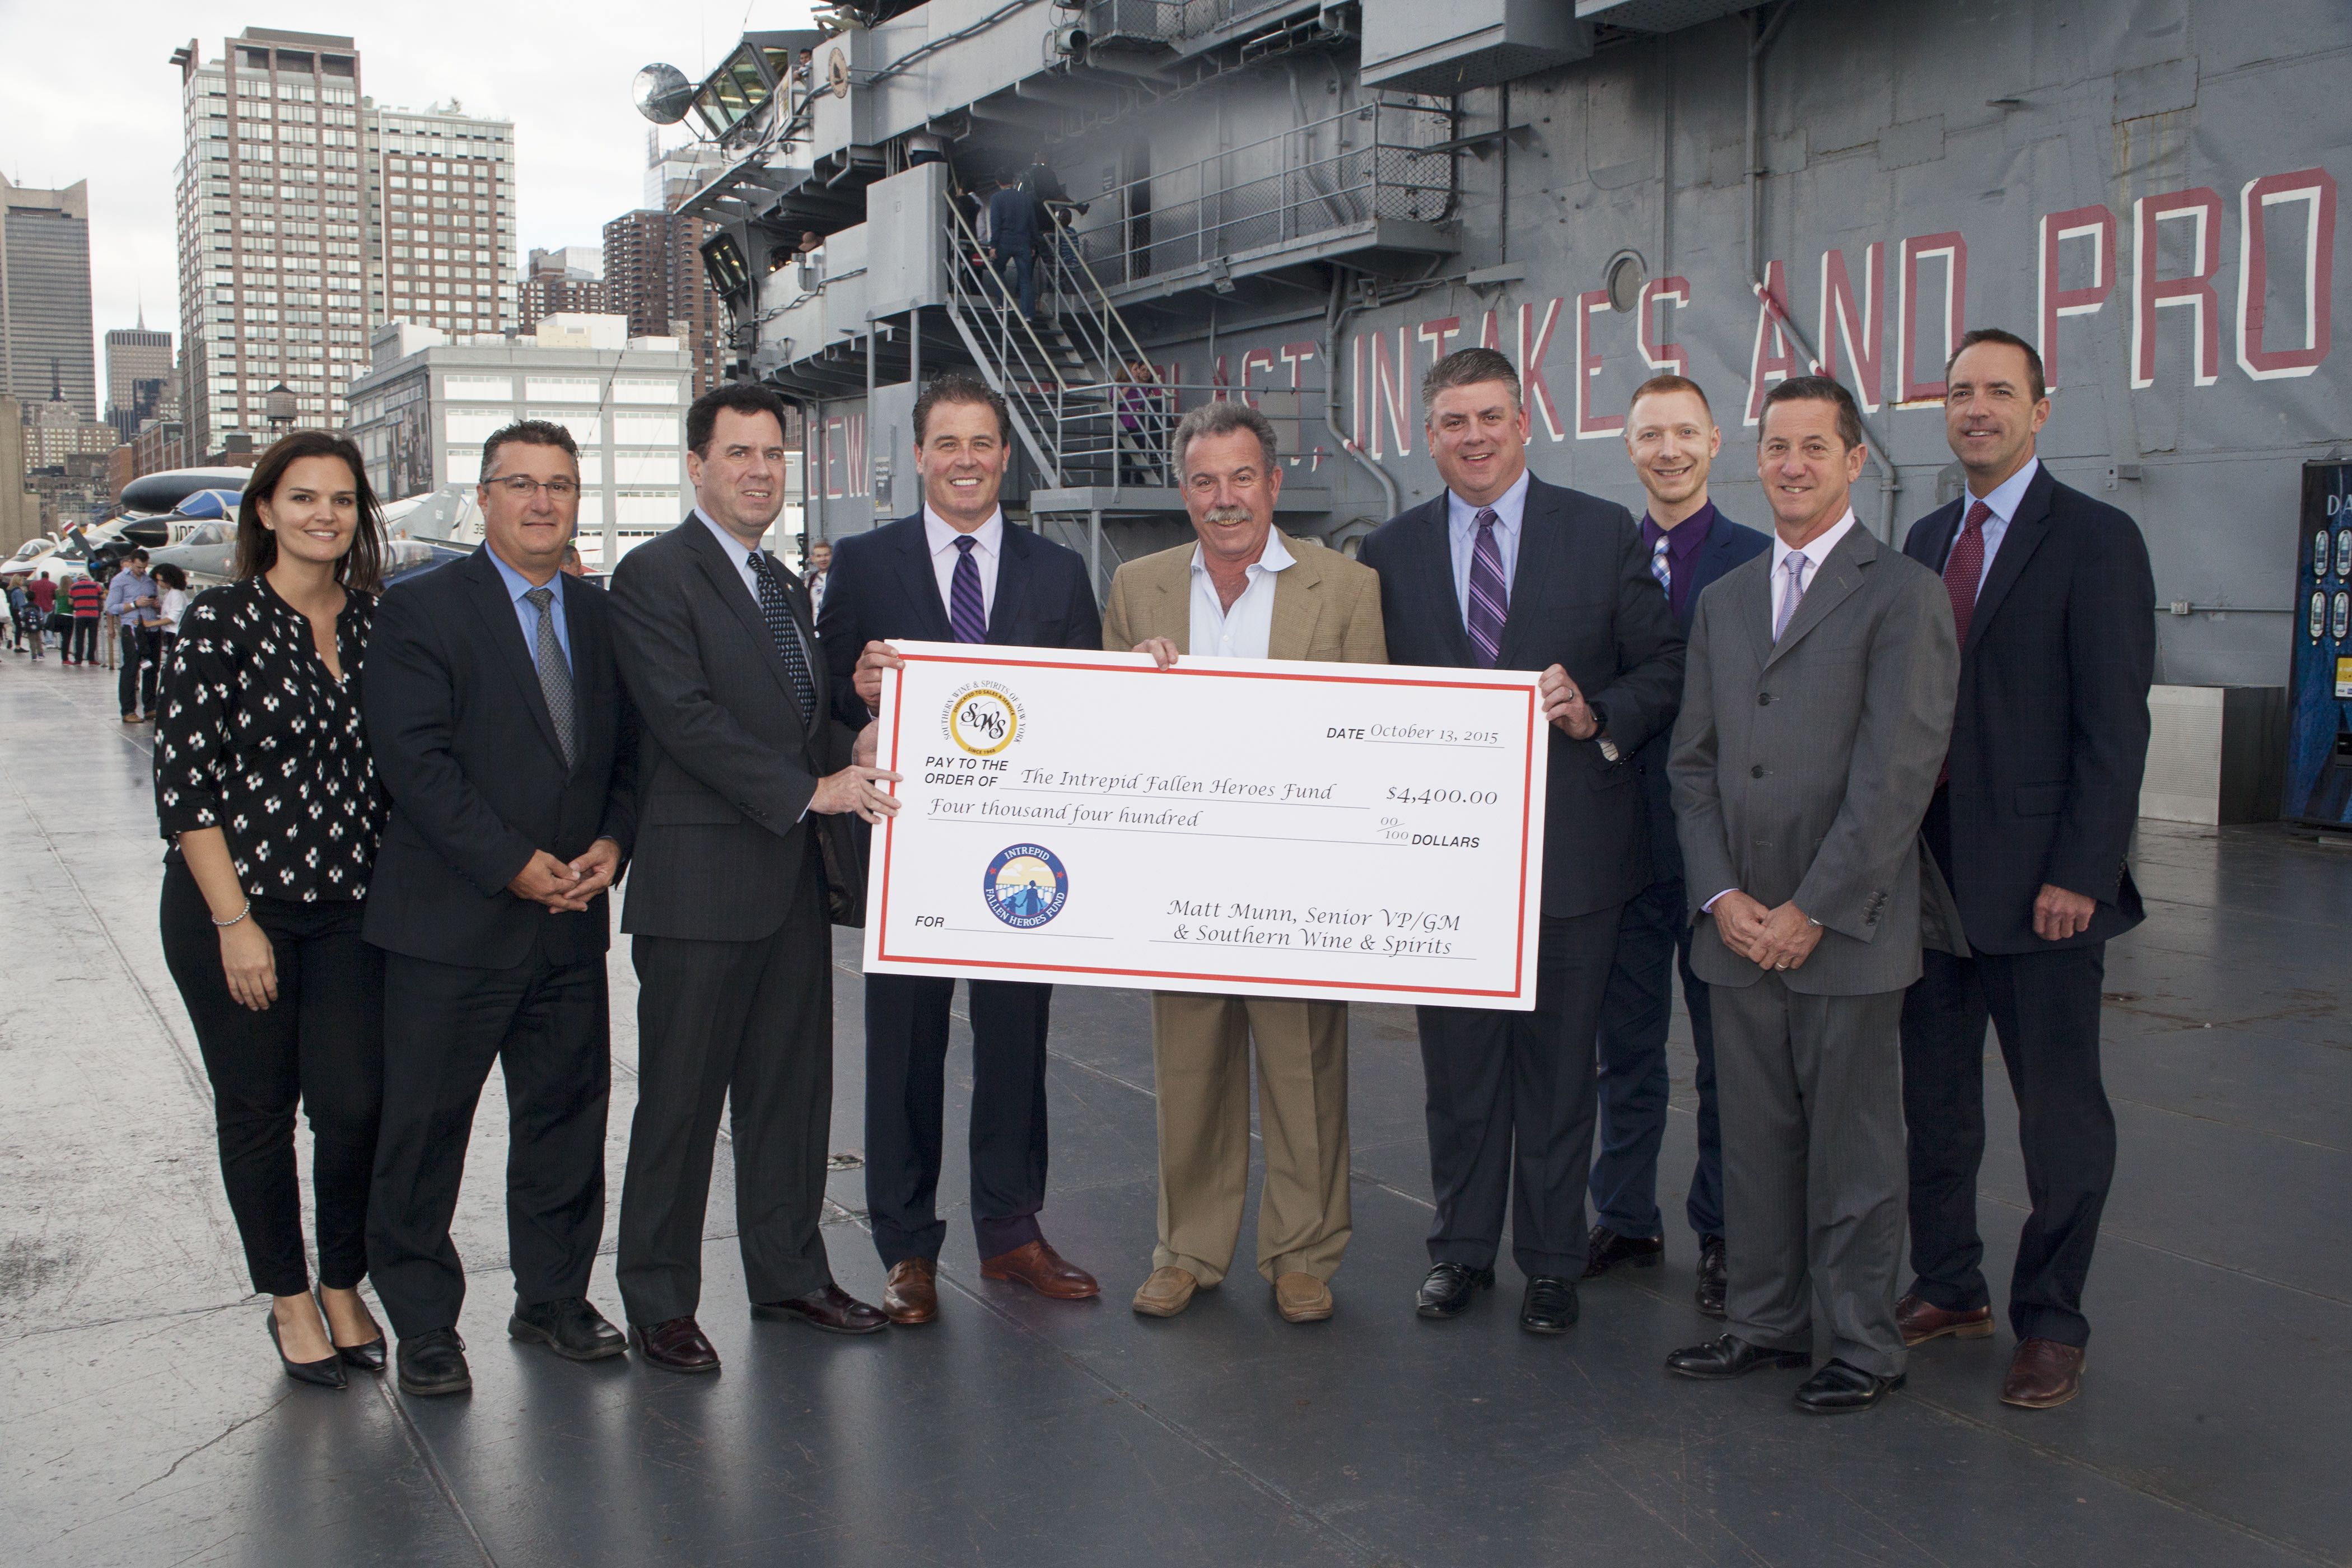 Southern Wine & Spirits of New York presents their donation to Intrepid Fallen Heroes Fund President, David Winters and Vice President, Lisa Yaconiello.